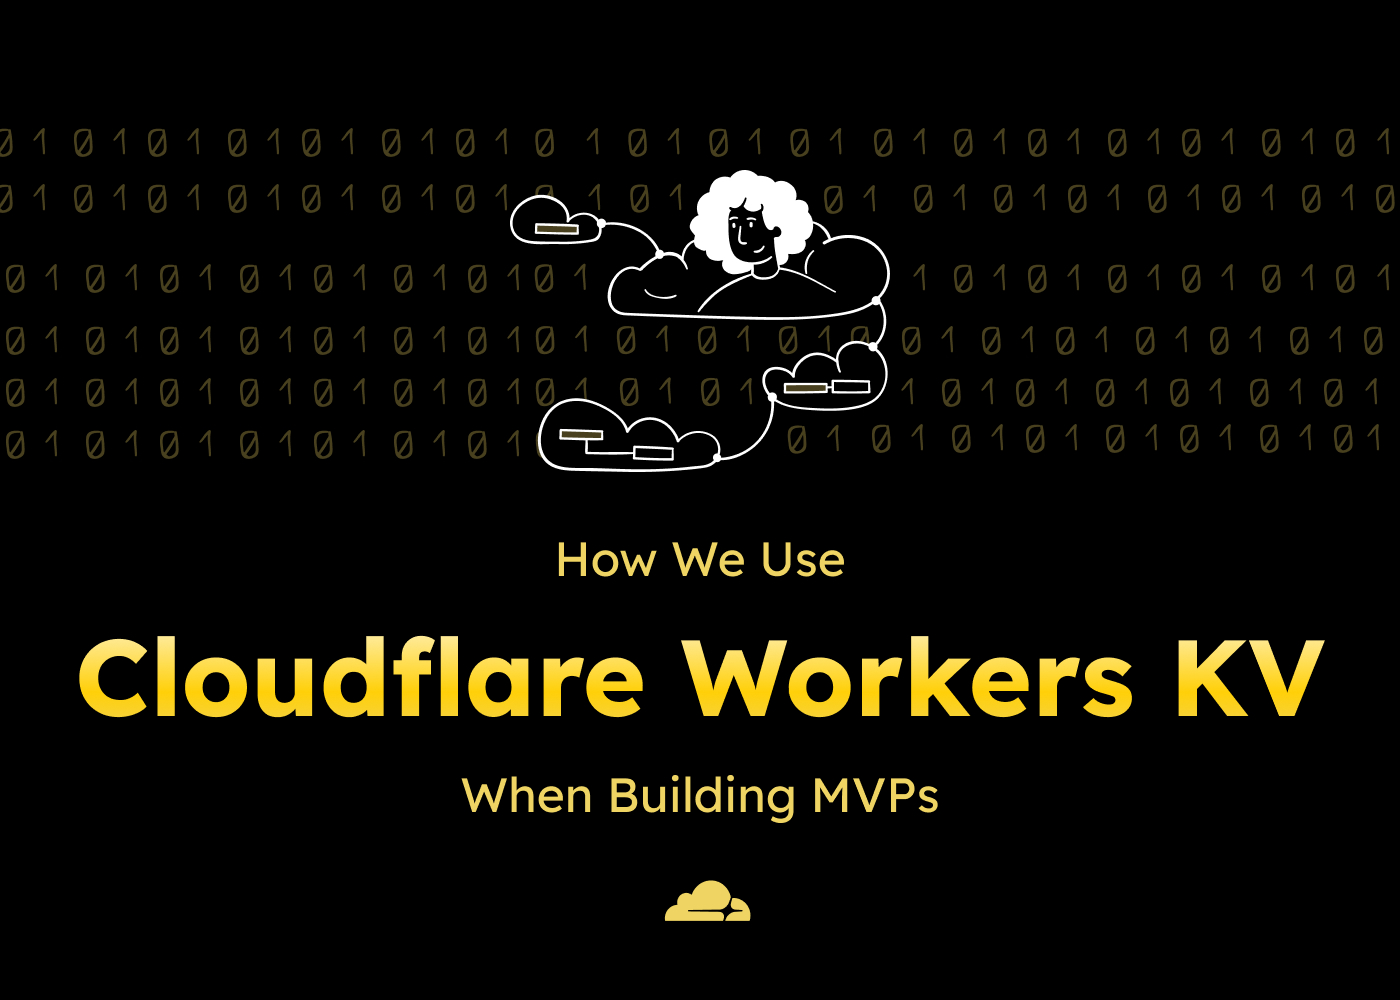 How we use Cloudflare Workers KV when building MVPs